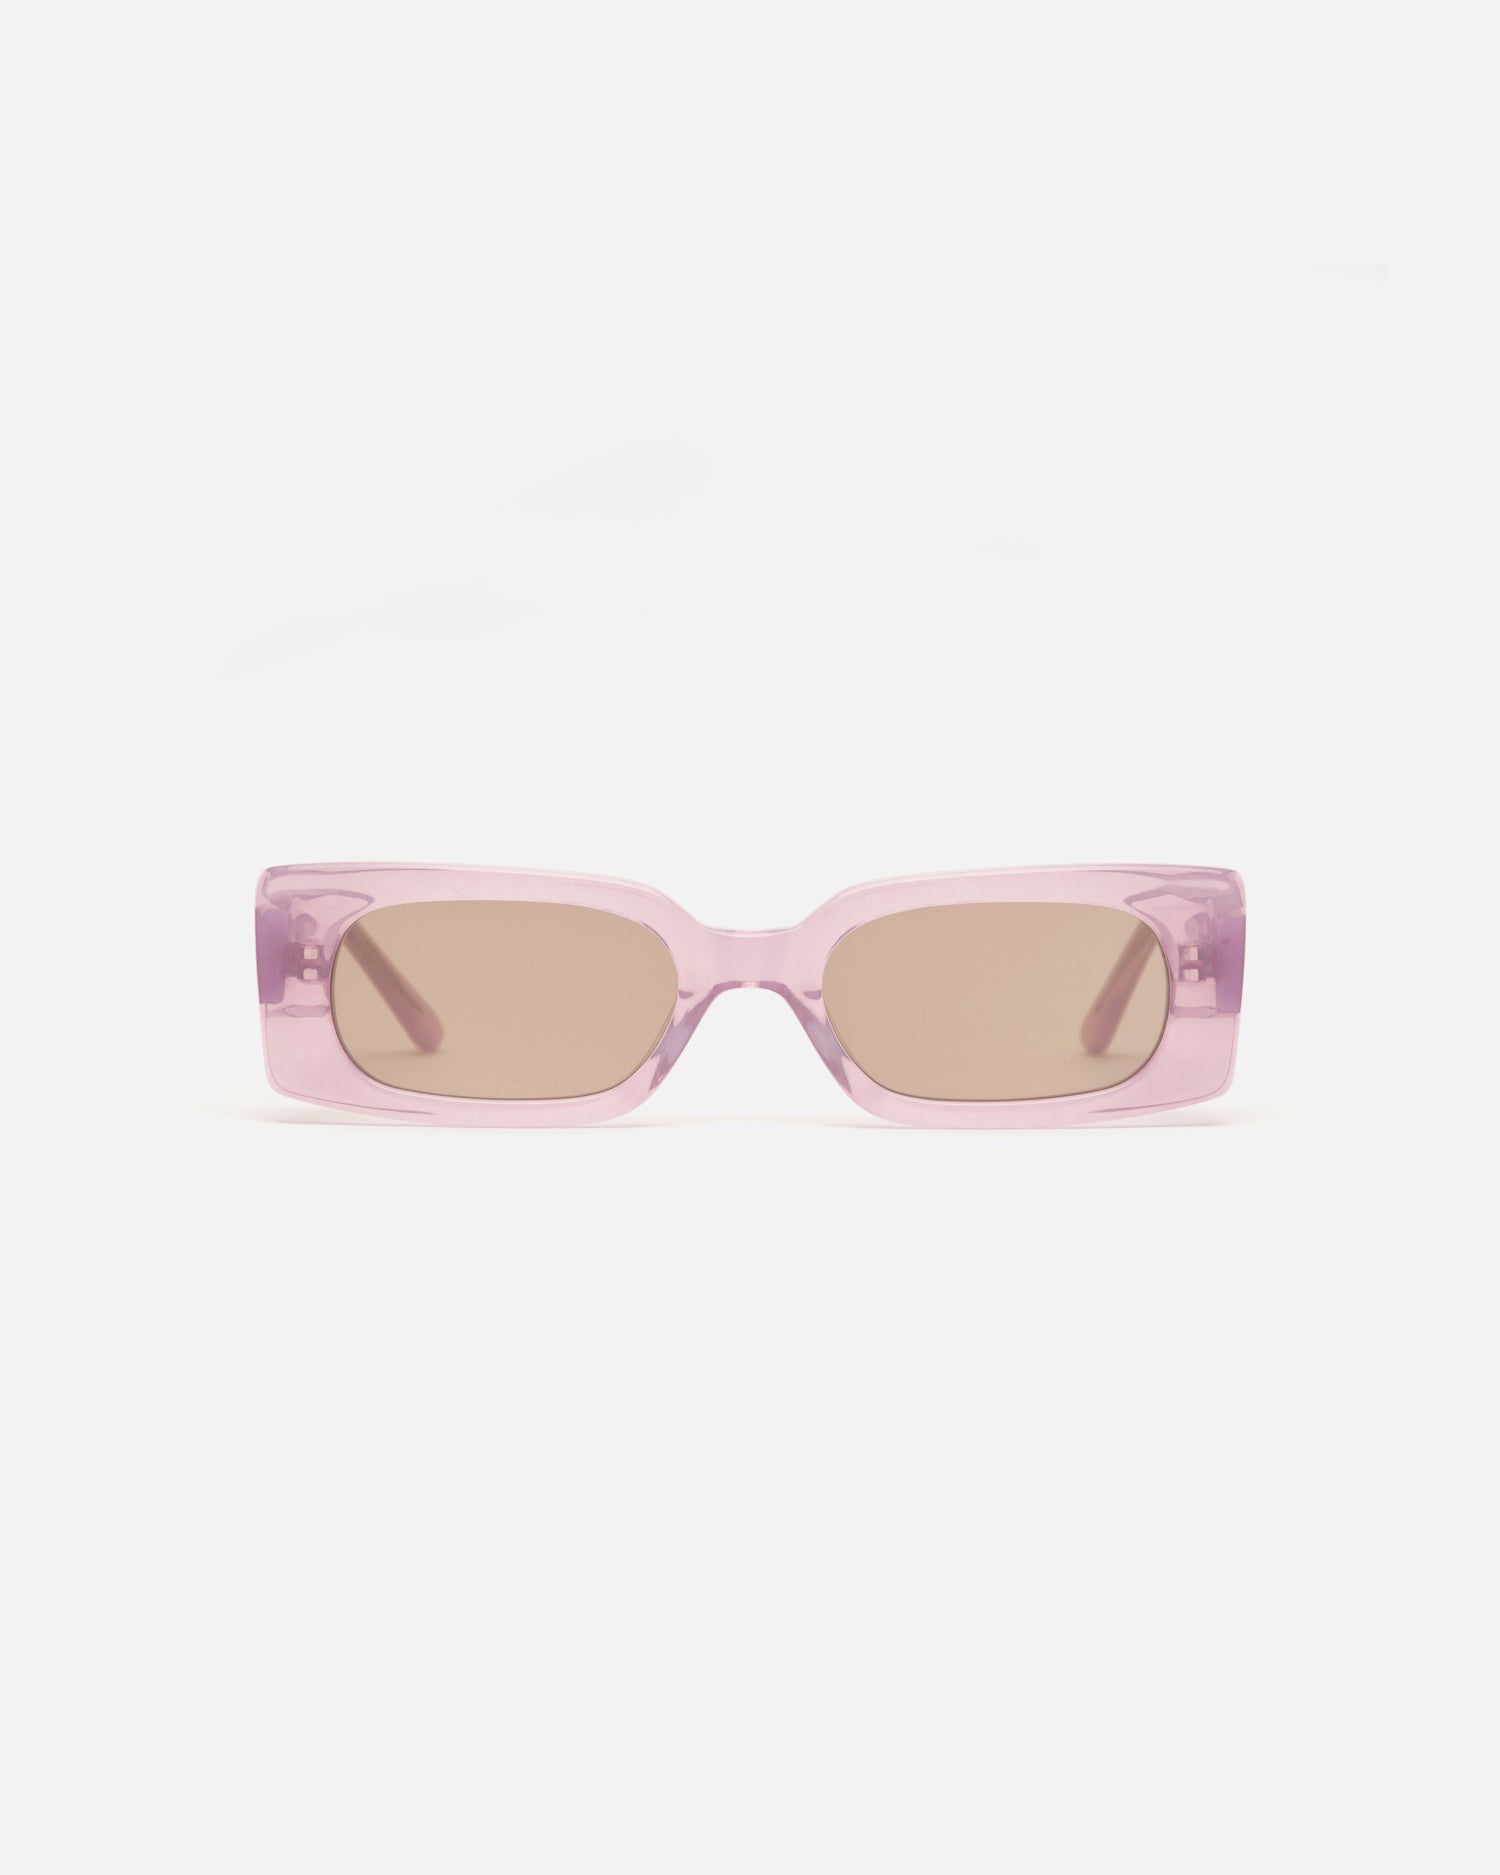 Lu Goldie Salome rectangle Sunglasses in lilac purple acetate with tan brown lenses, front image